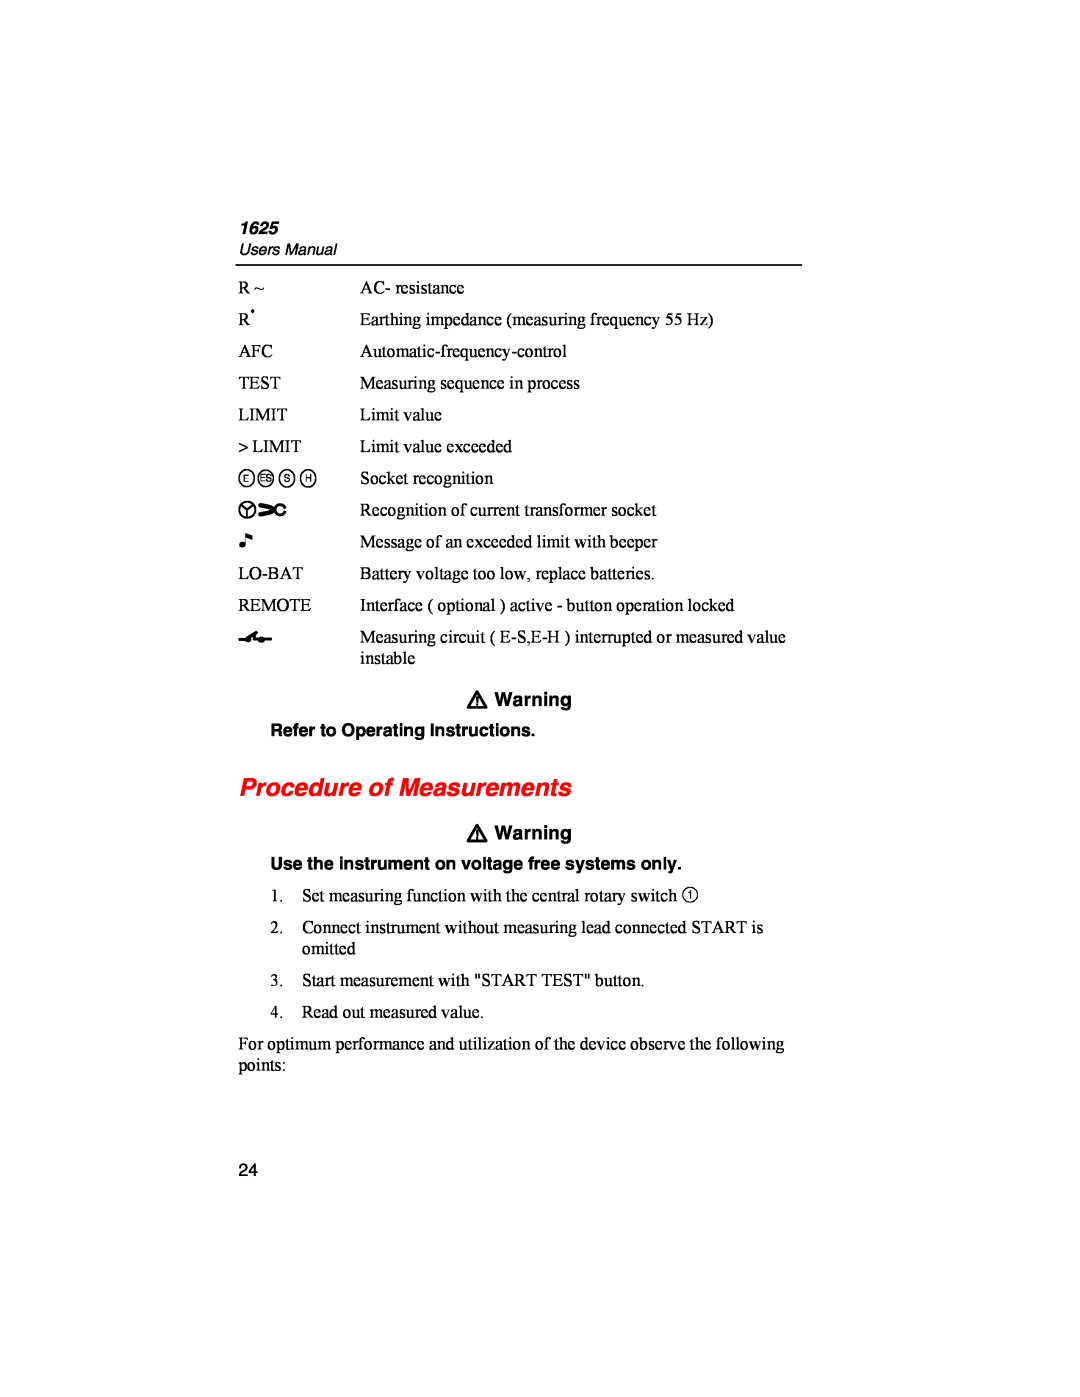 Fluke 1625 user manual Procedure of Measurements, W Warning, Refer to Operating Instructions 